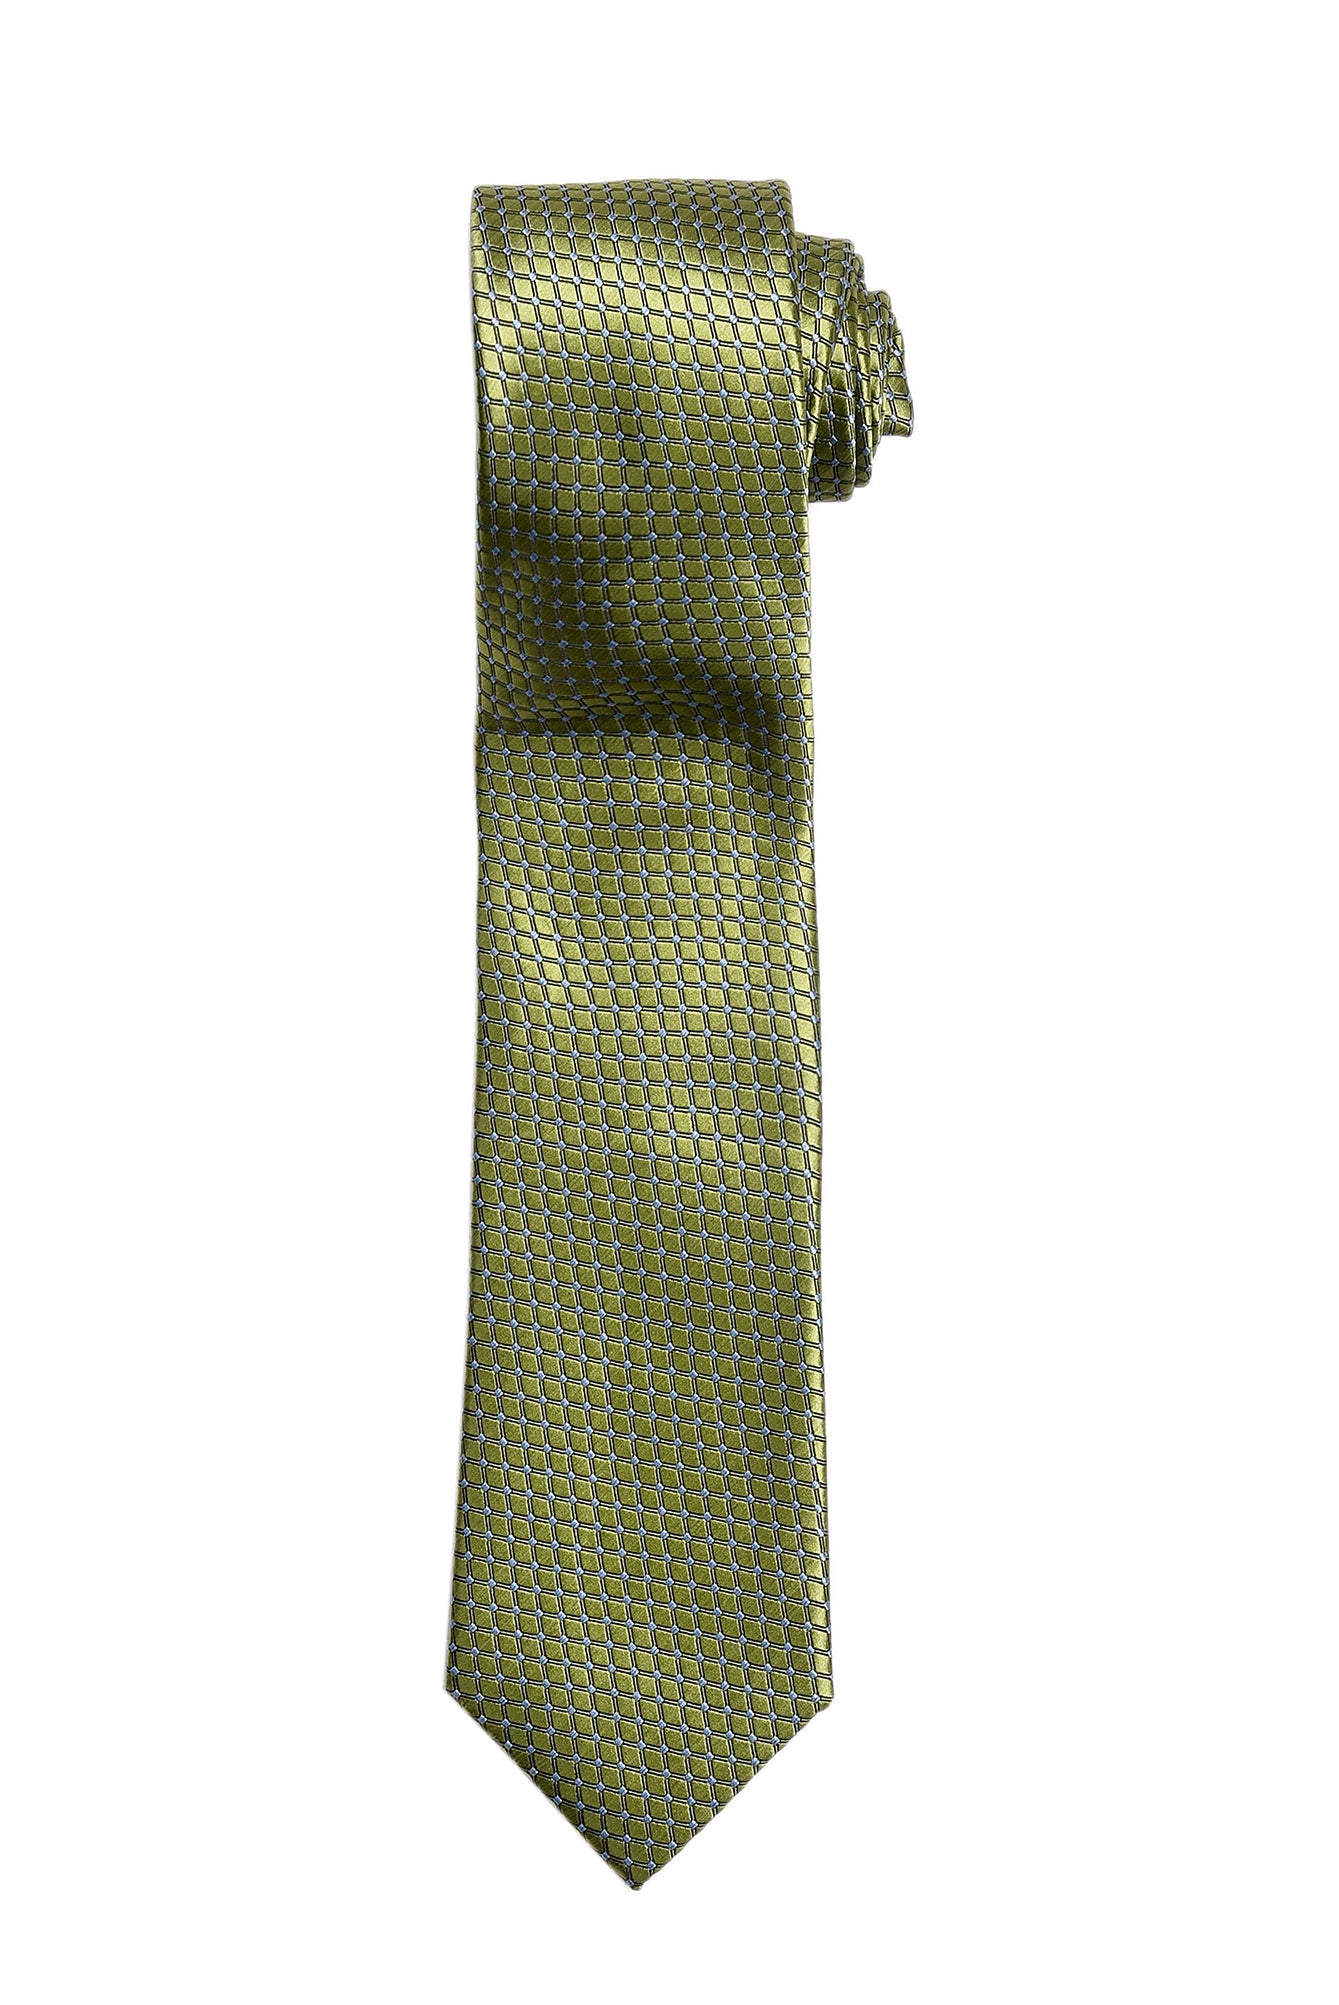 AST3198 POLYESTER WOVEN TIE